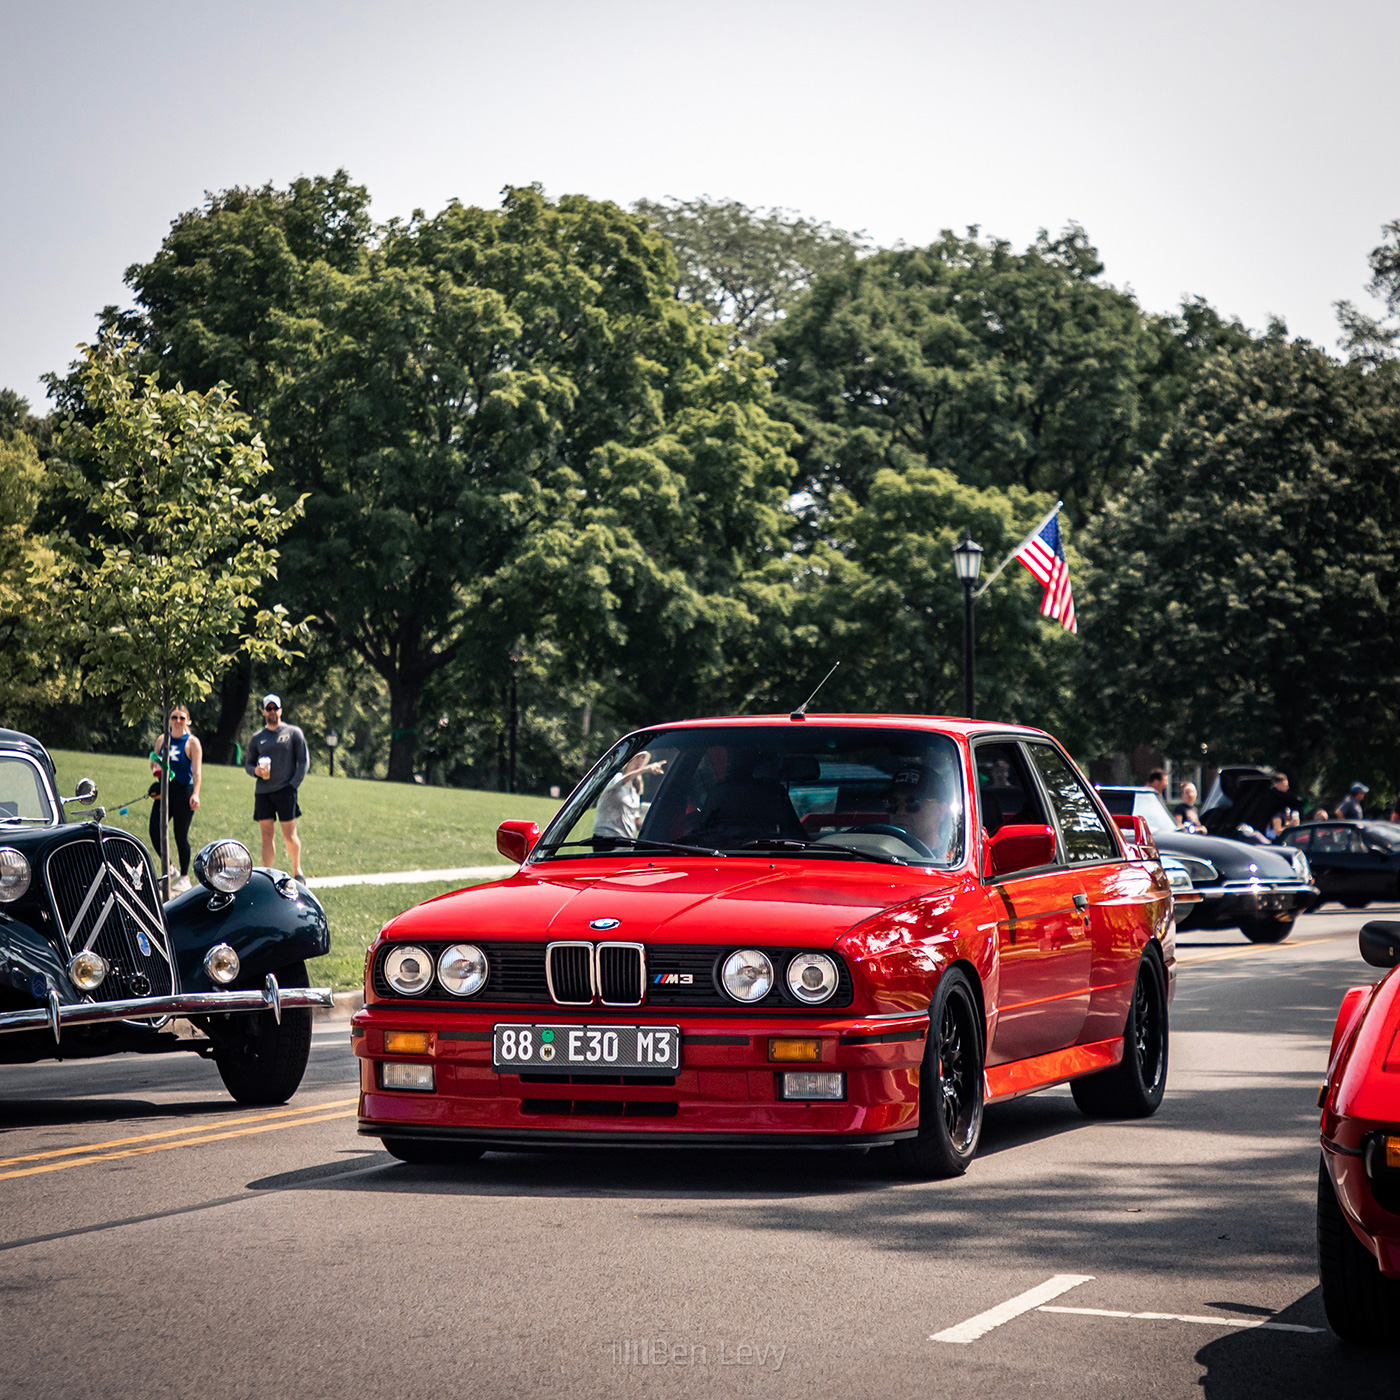 Red BMW M3 at Hinsdale Cars and Coffee